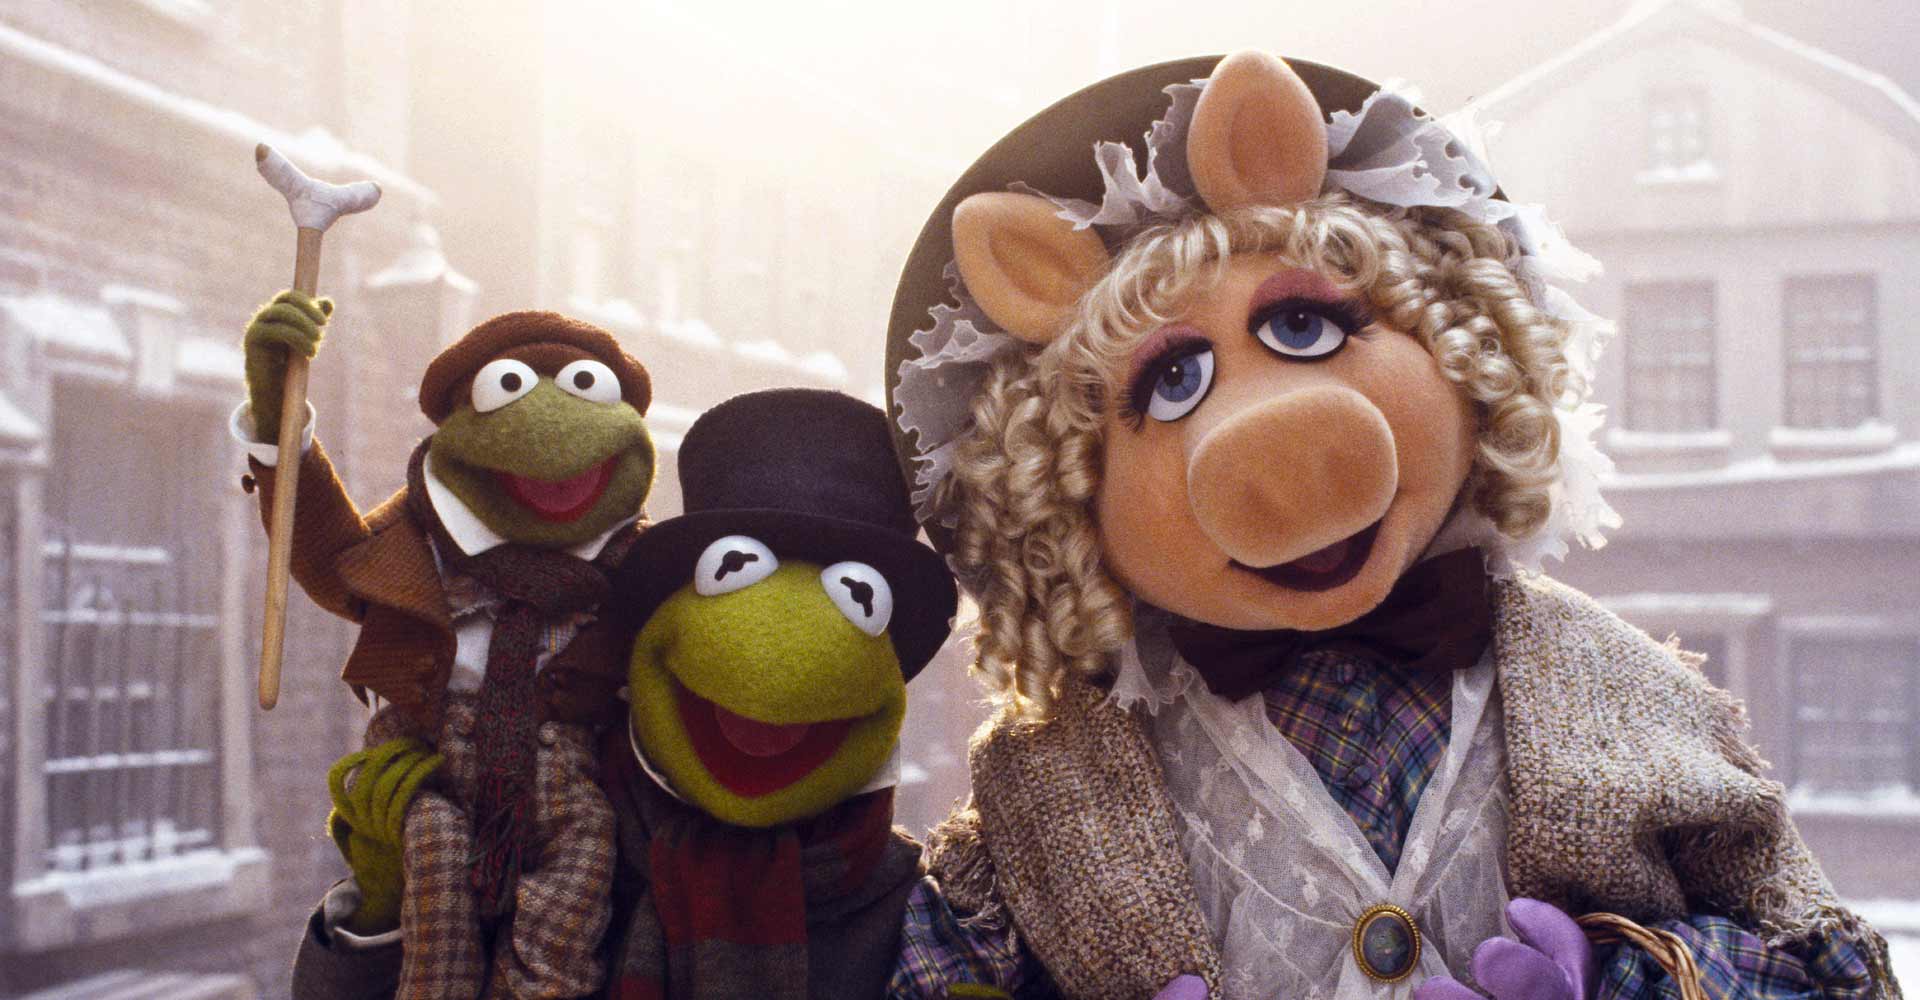 Muppet puppets of a pig, frog and others standing in snowy scene